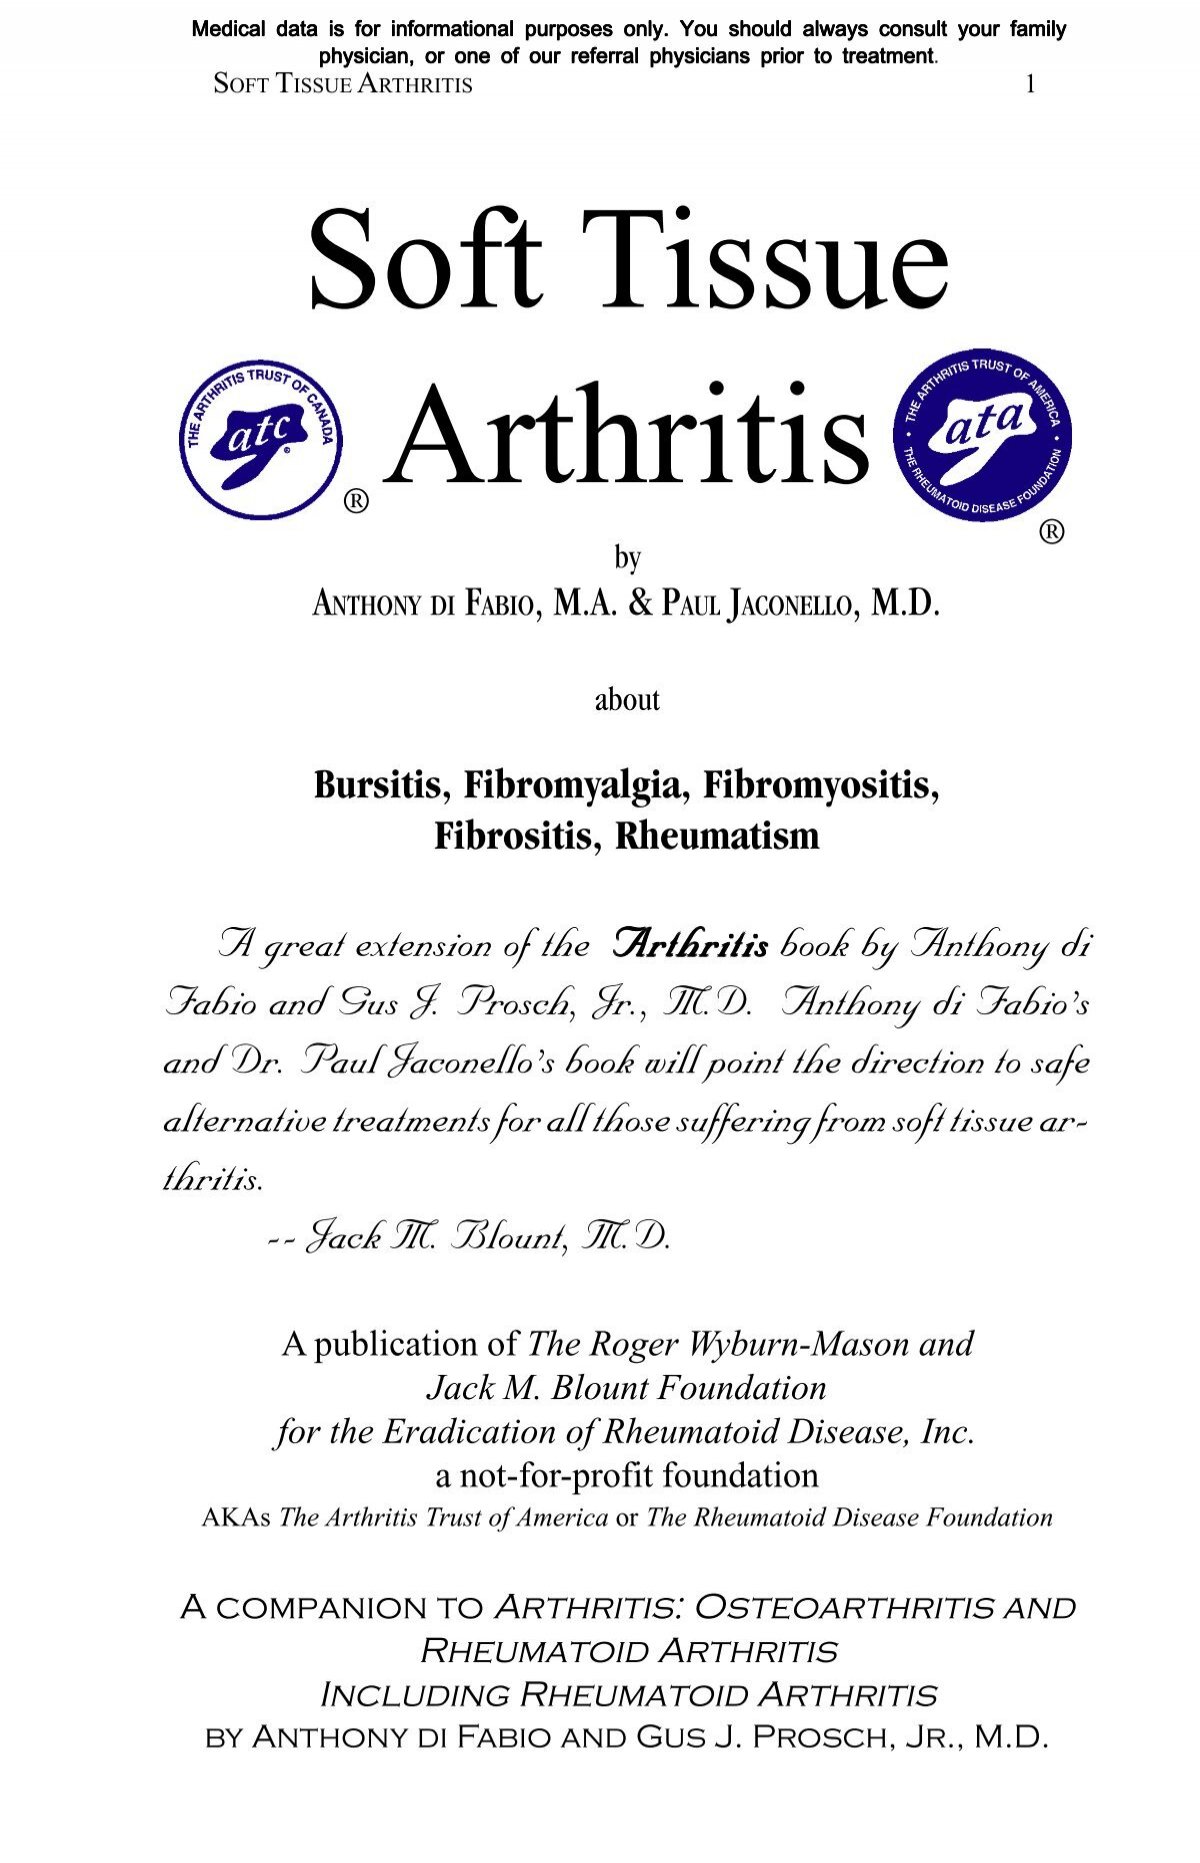 Osteoarthritis, Rheumatisms, Arthritis: Natural Solutions Which Will Change Your Life [Book]